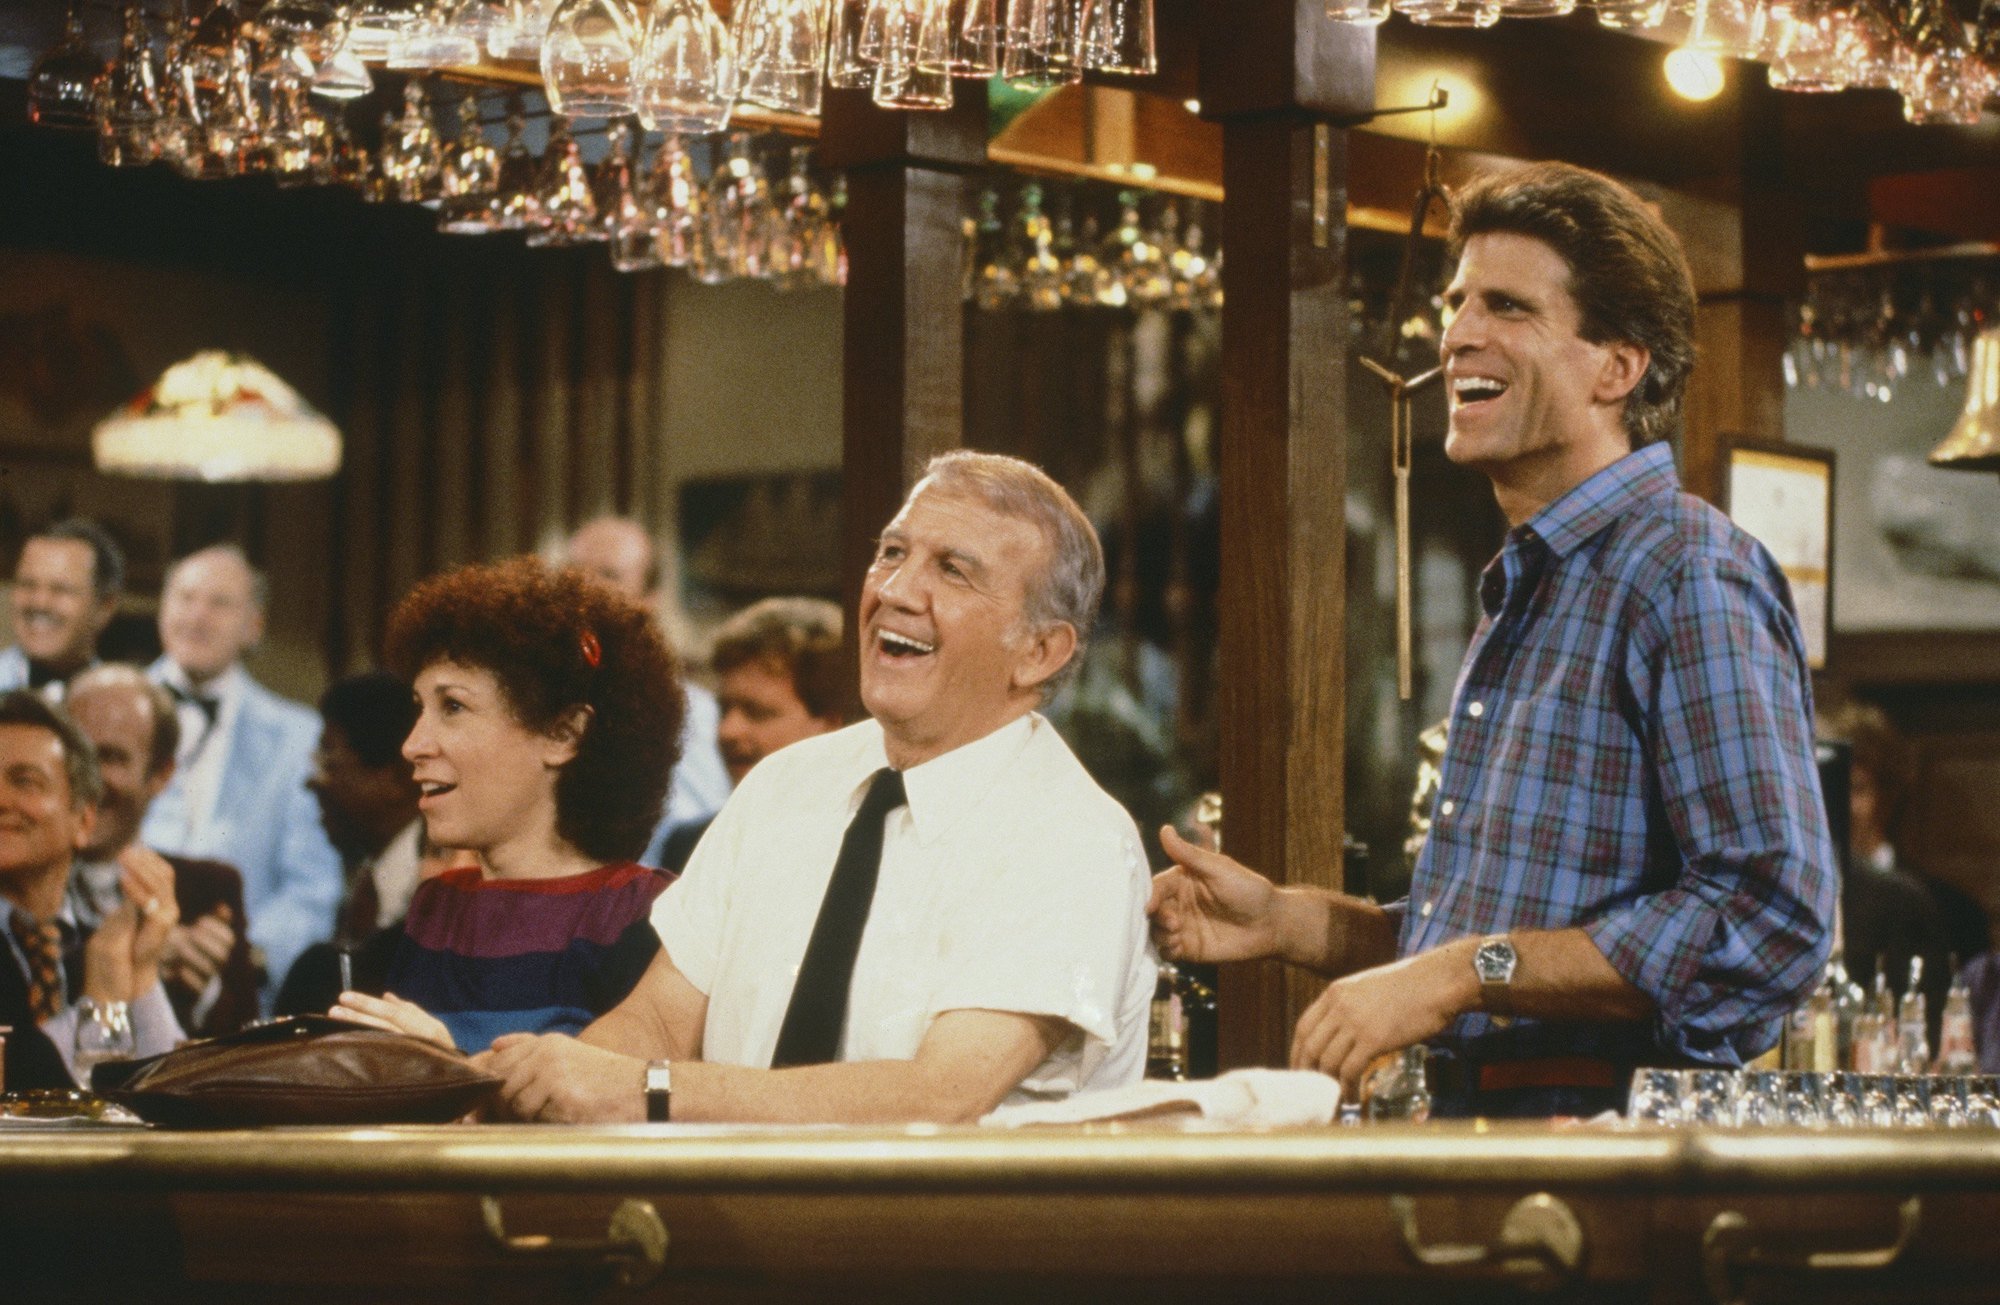 Carla, Coach, and Sam in a scene from 'Cheers' filmed in the bar